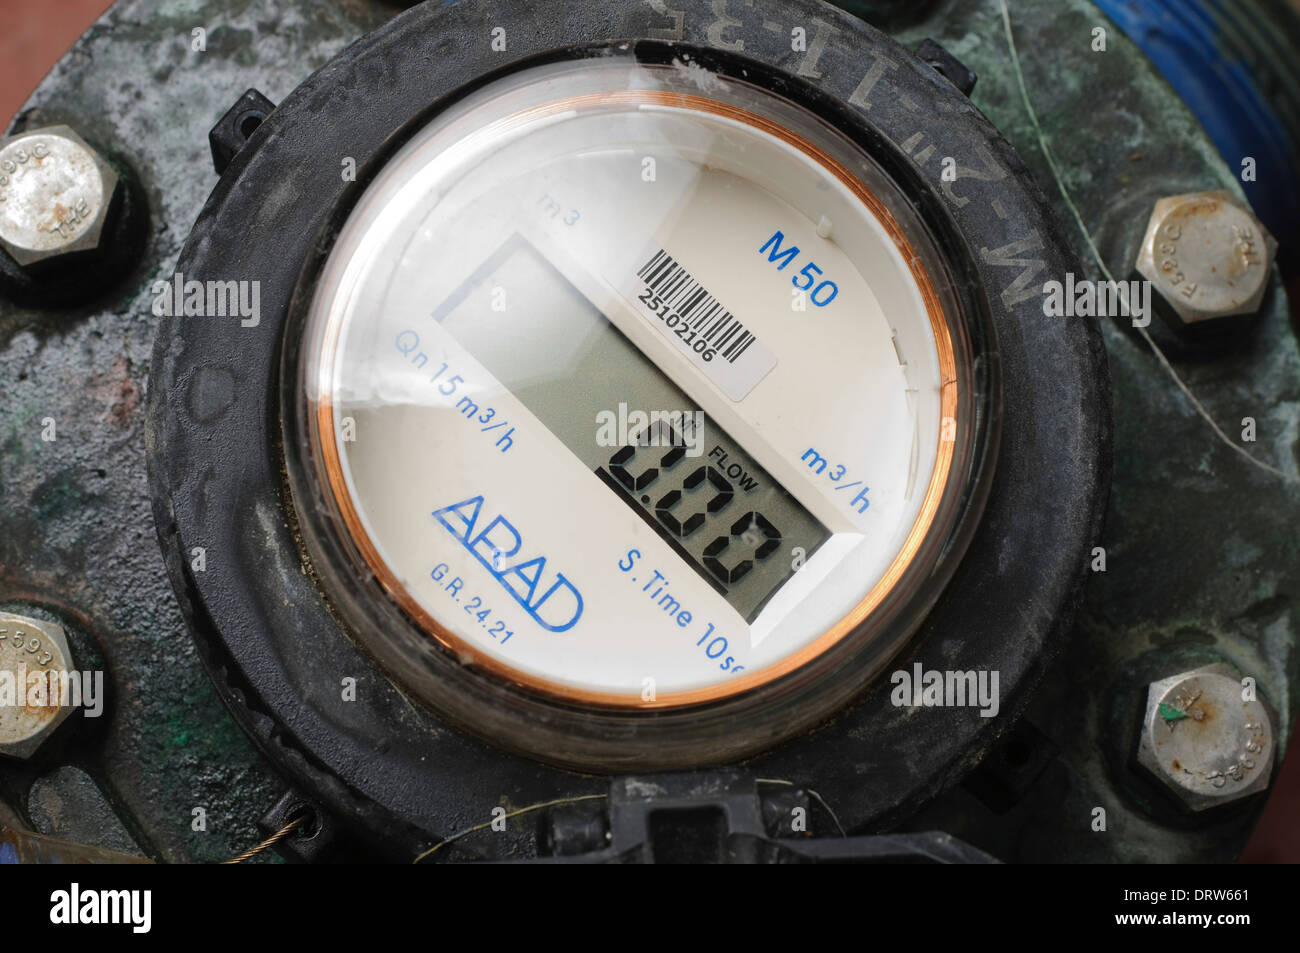 Water flow meter with digital display measures the hourly flow of the water in cubic metres Stock Photo